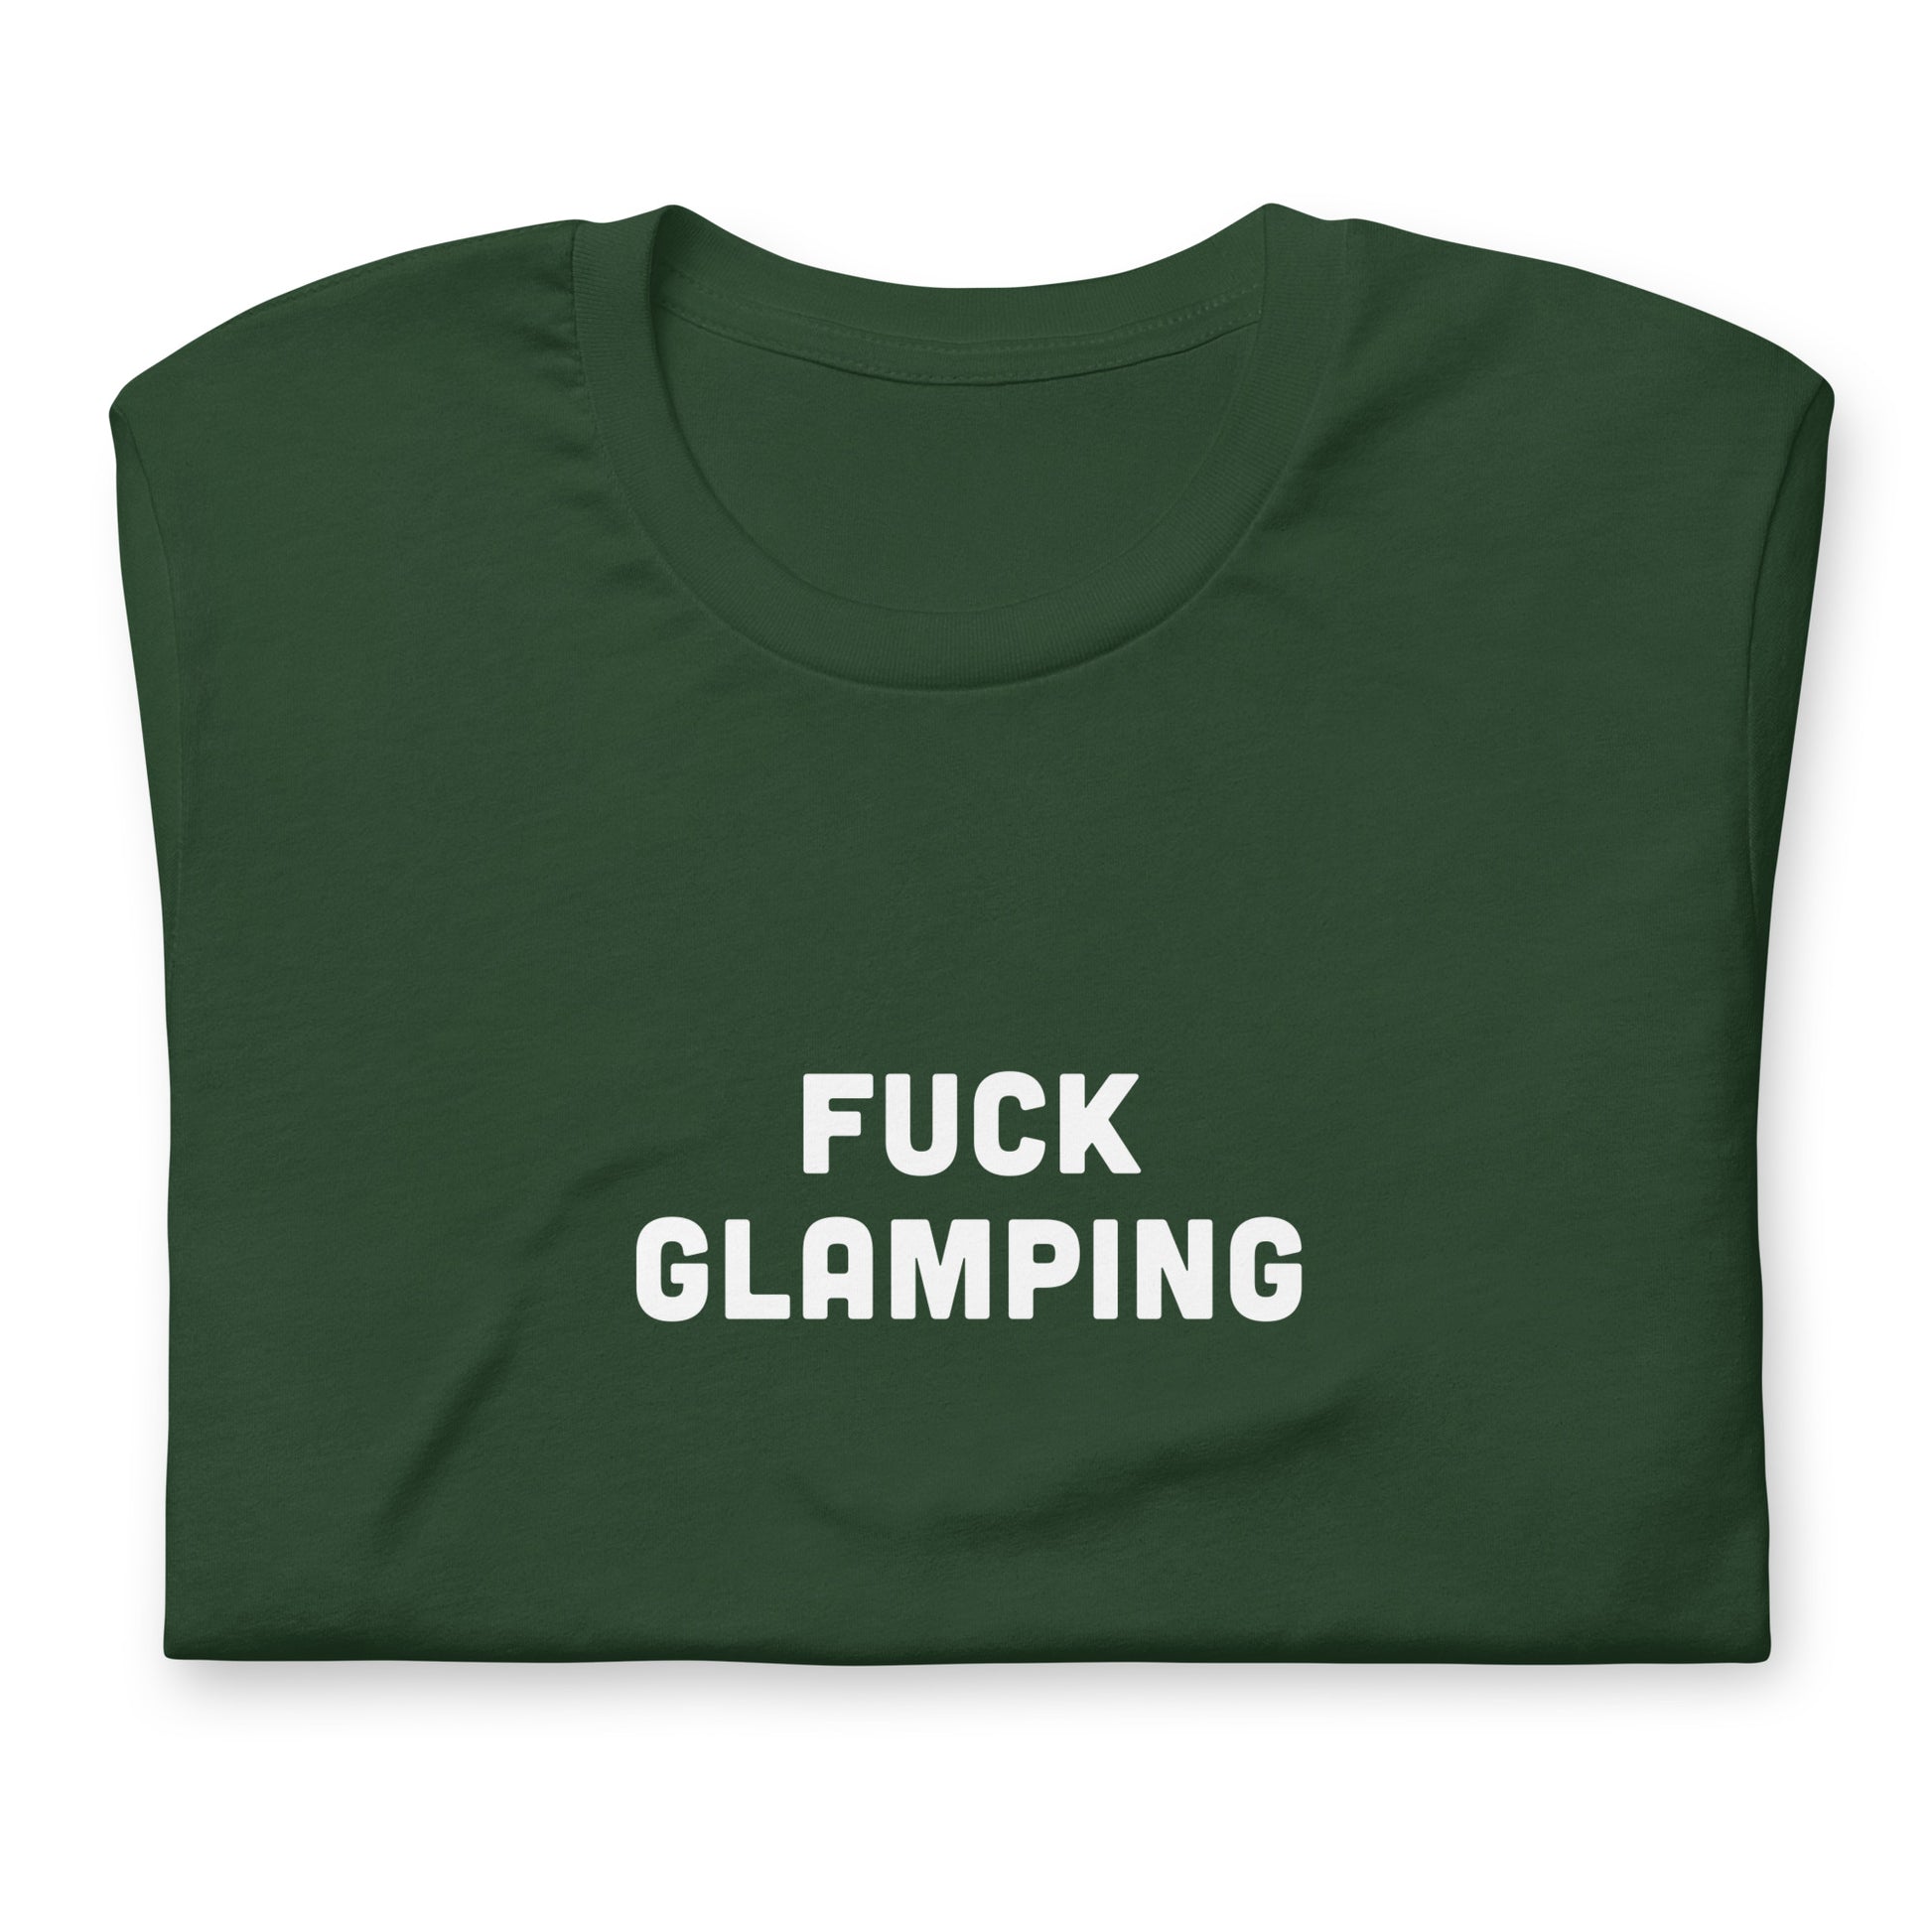 Fuck Glamping T-Shirt Size S Color Black